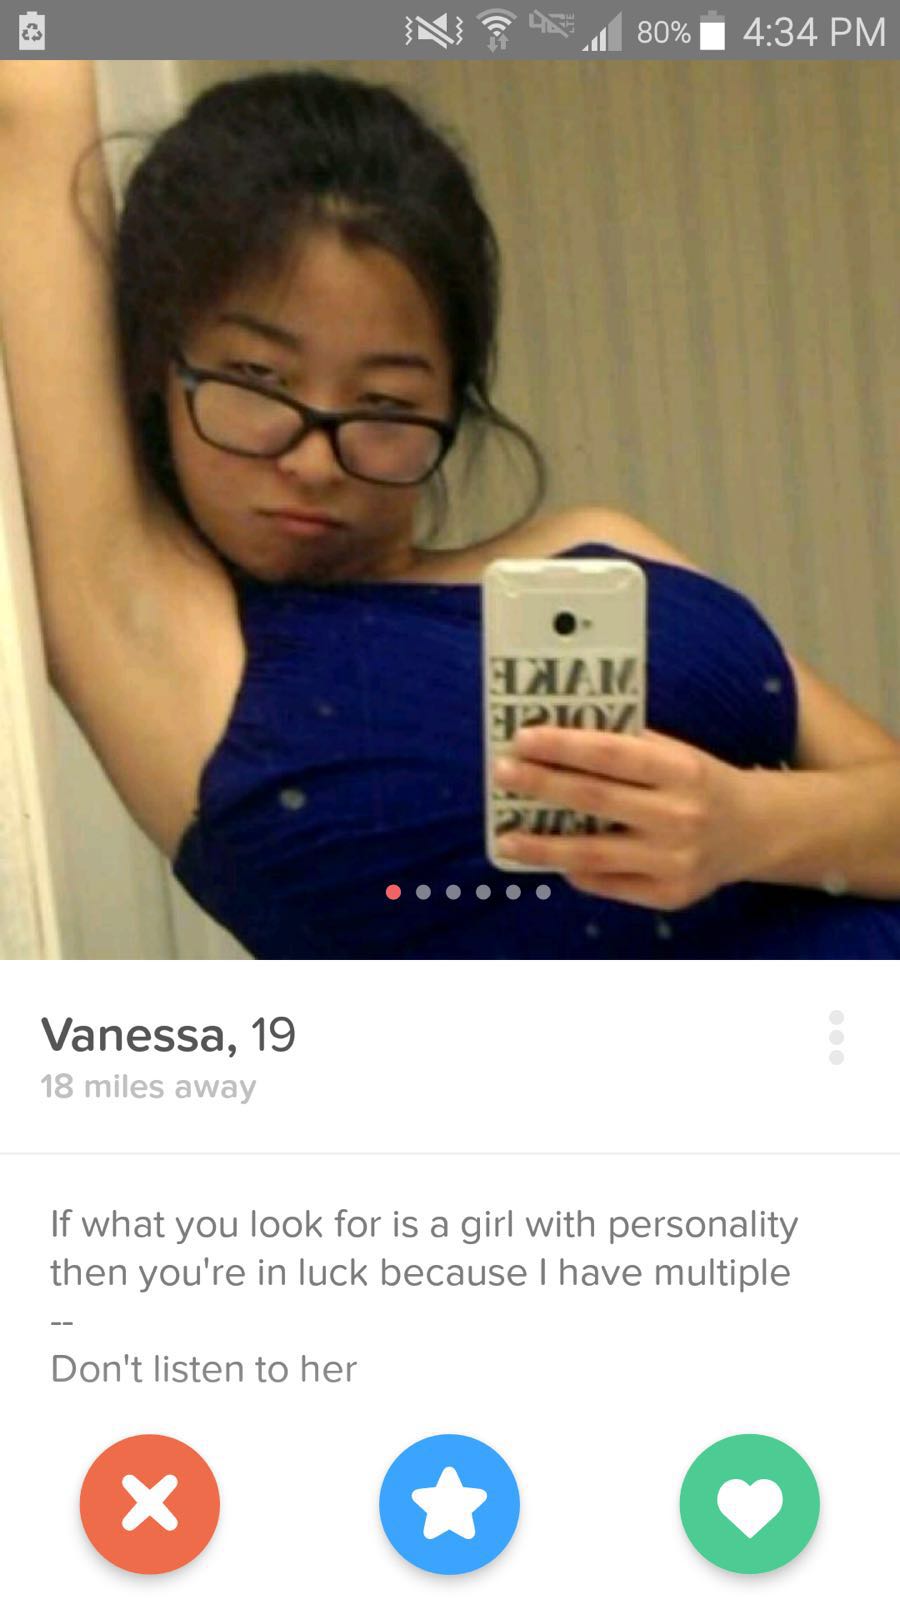 Vanessa 19 is having a conversation with her multiple personalities on her Tinder dating profile